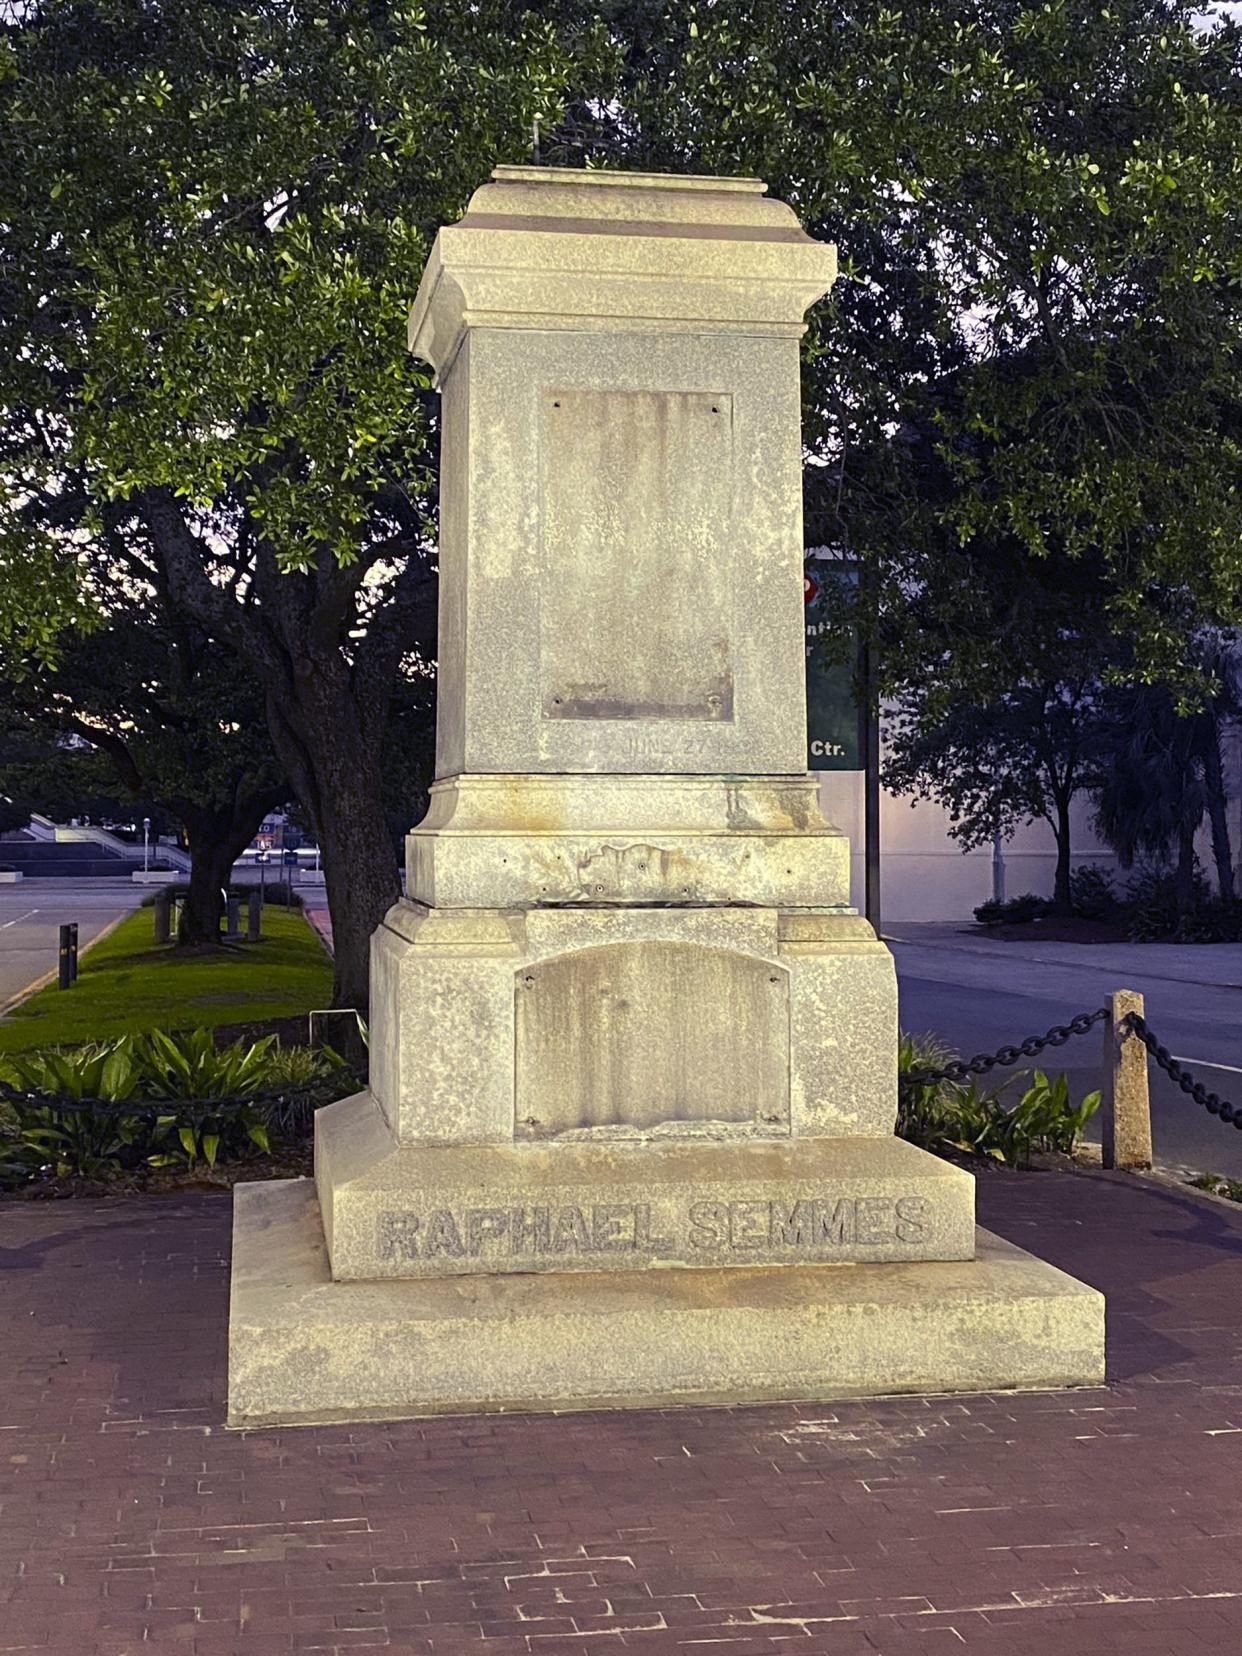 The pedestal where the statue of Admiral Raphael Semmes stands empty on June 5, 2020 in Mobile, Ala. The city of Mobile removed the Confederate statue early Friday without making any public announcements.